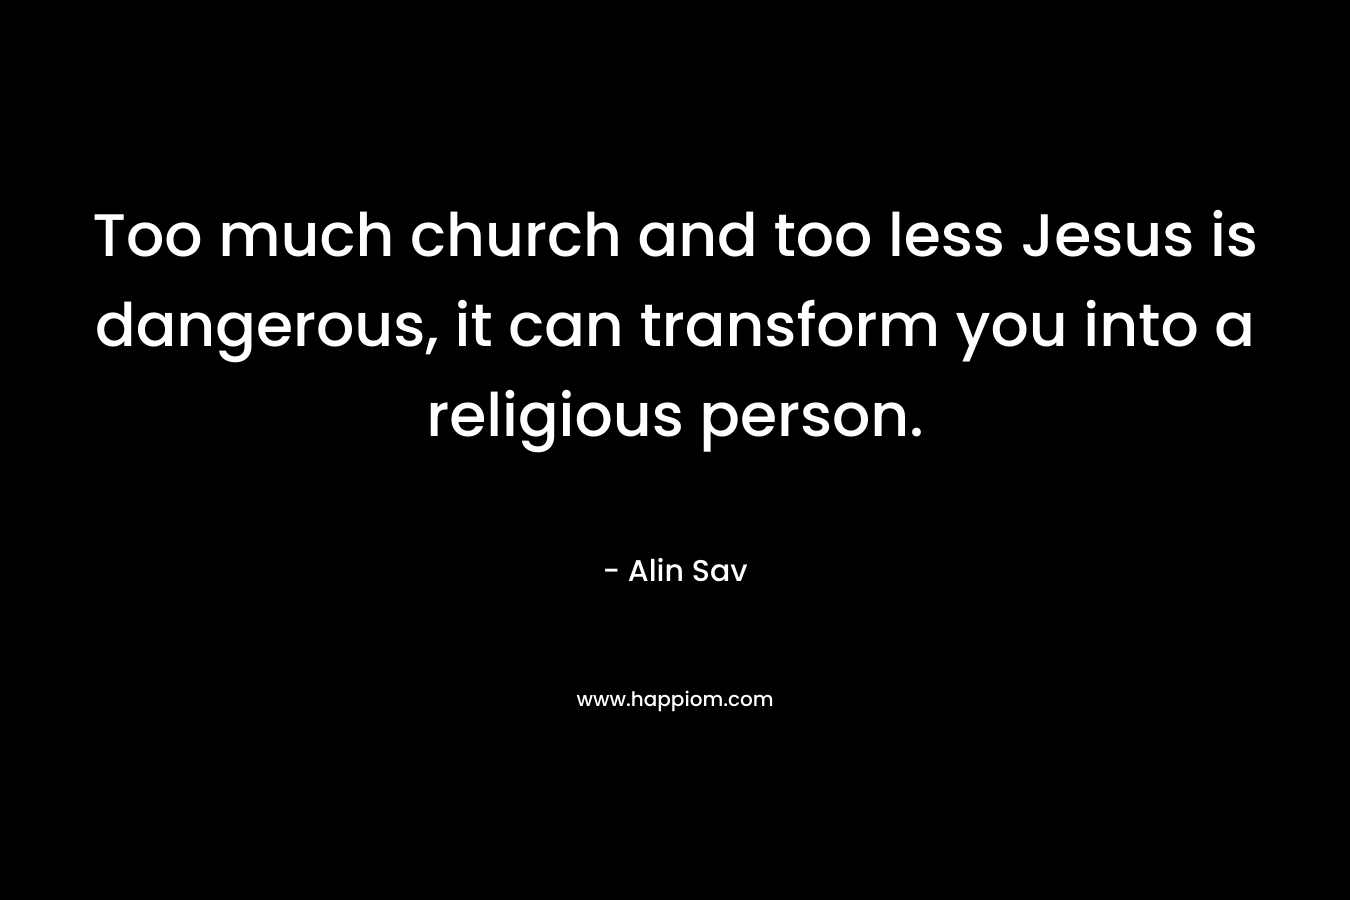 Too much church and too less Jesus is dangerous, it can transform you into a religious person.